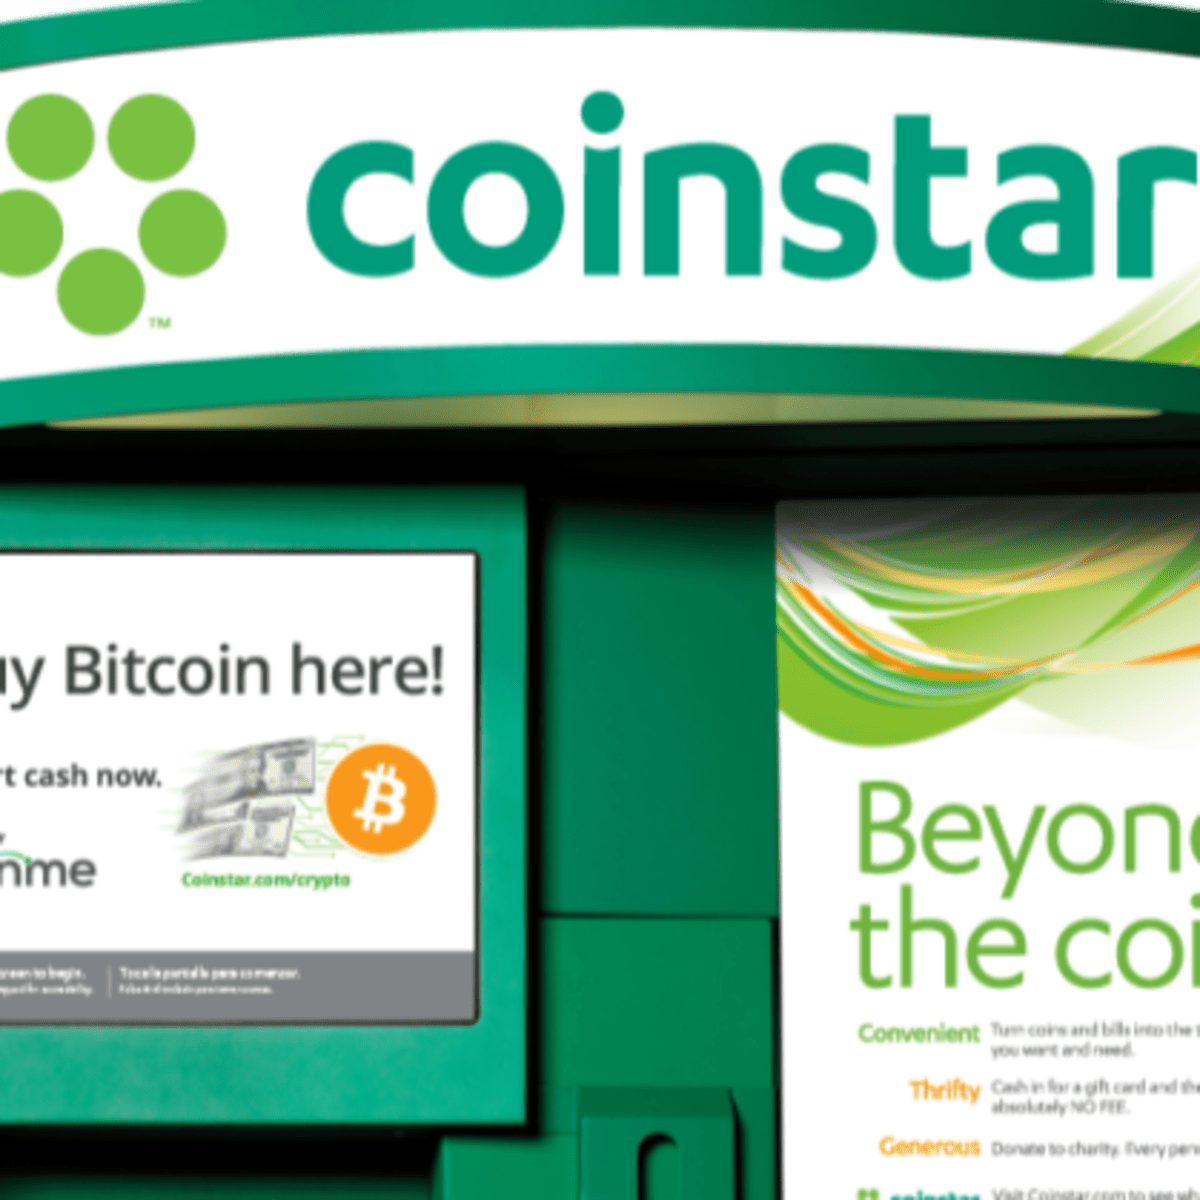 Walmart To Add 200 Bitcoin ATMs in New Pilot Program - The Street Crypto:  Bitcoin and cryptocurrency news, advice, analysis and more